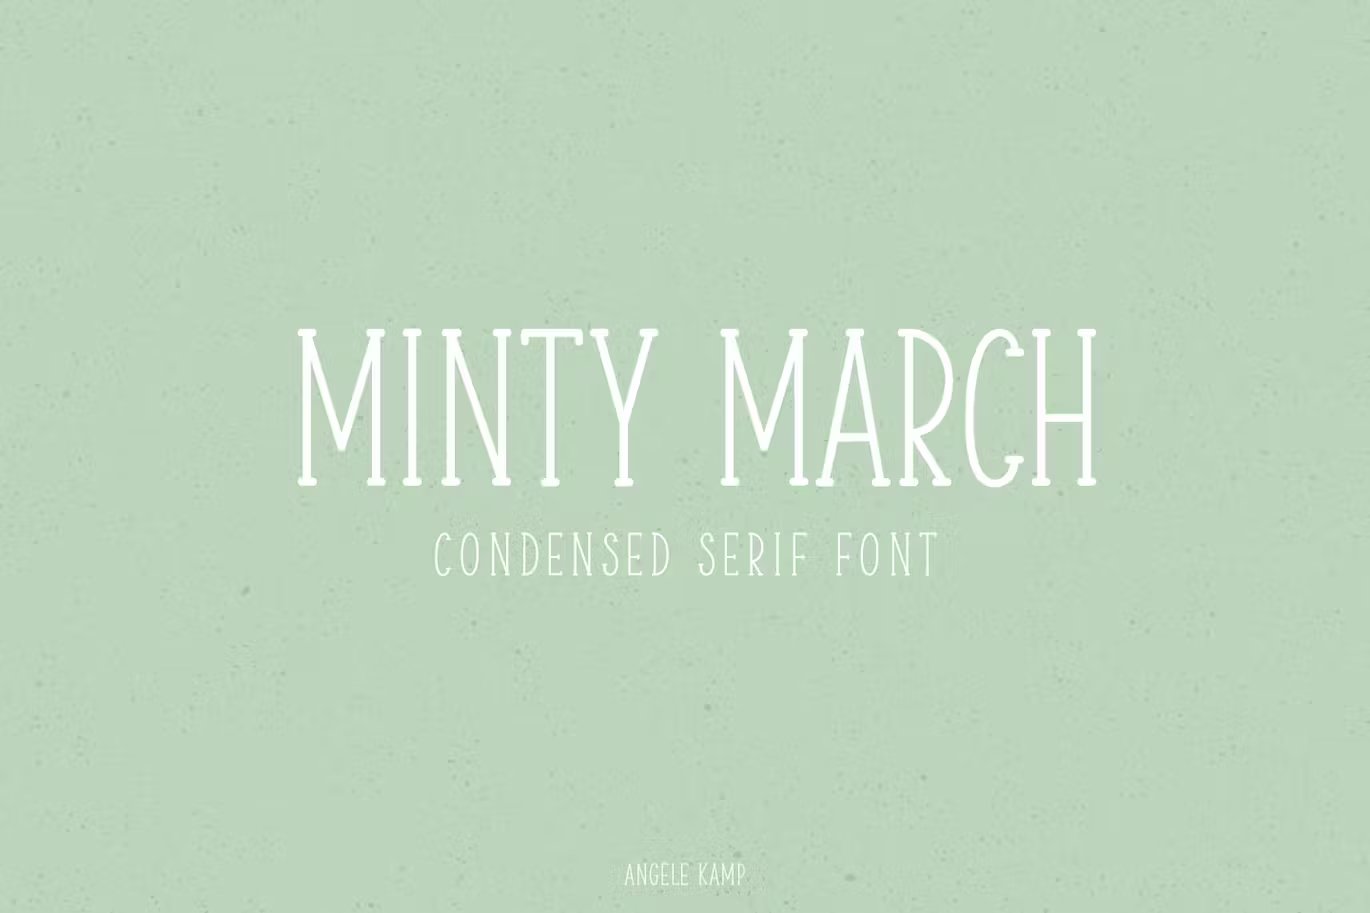 Minty March, Condensed serif font